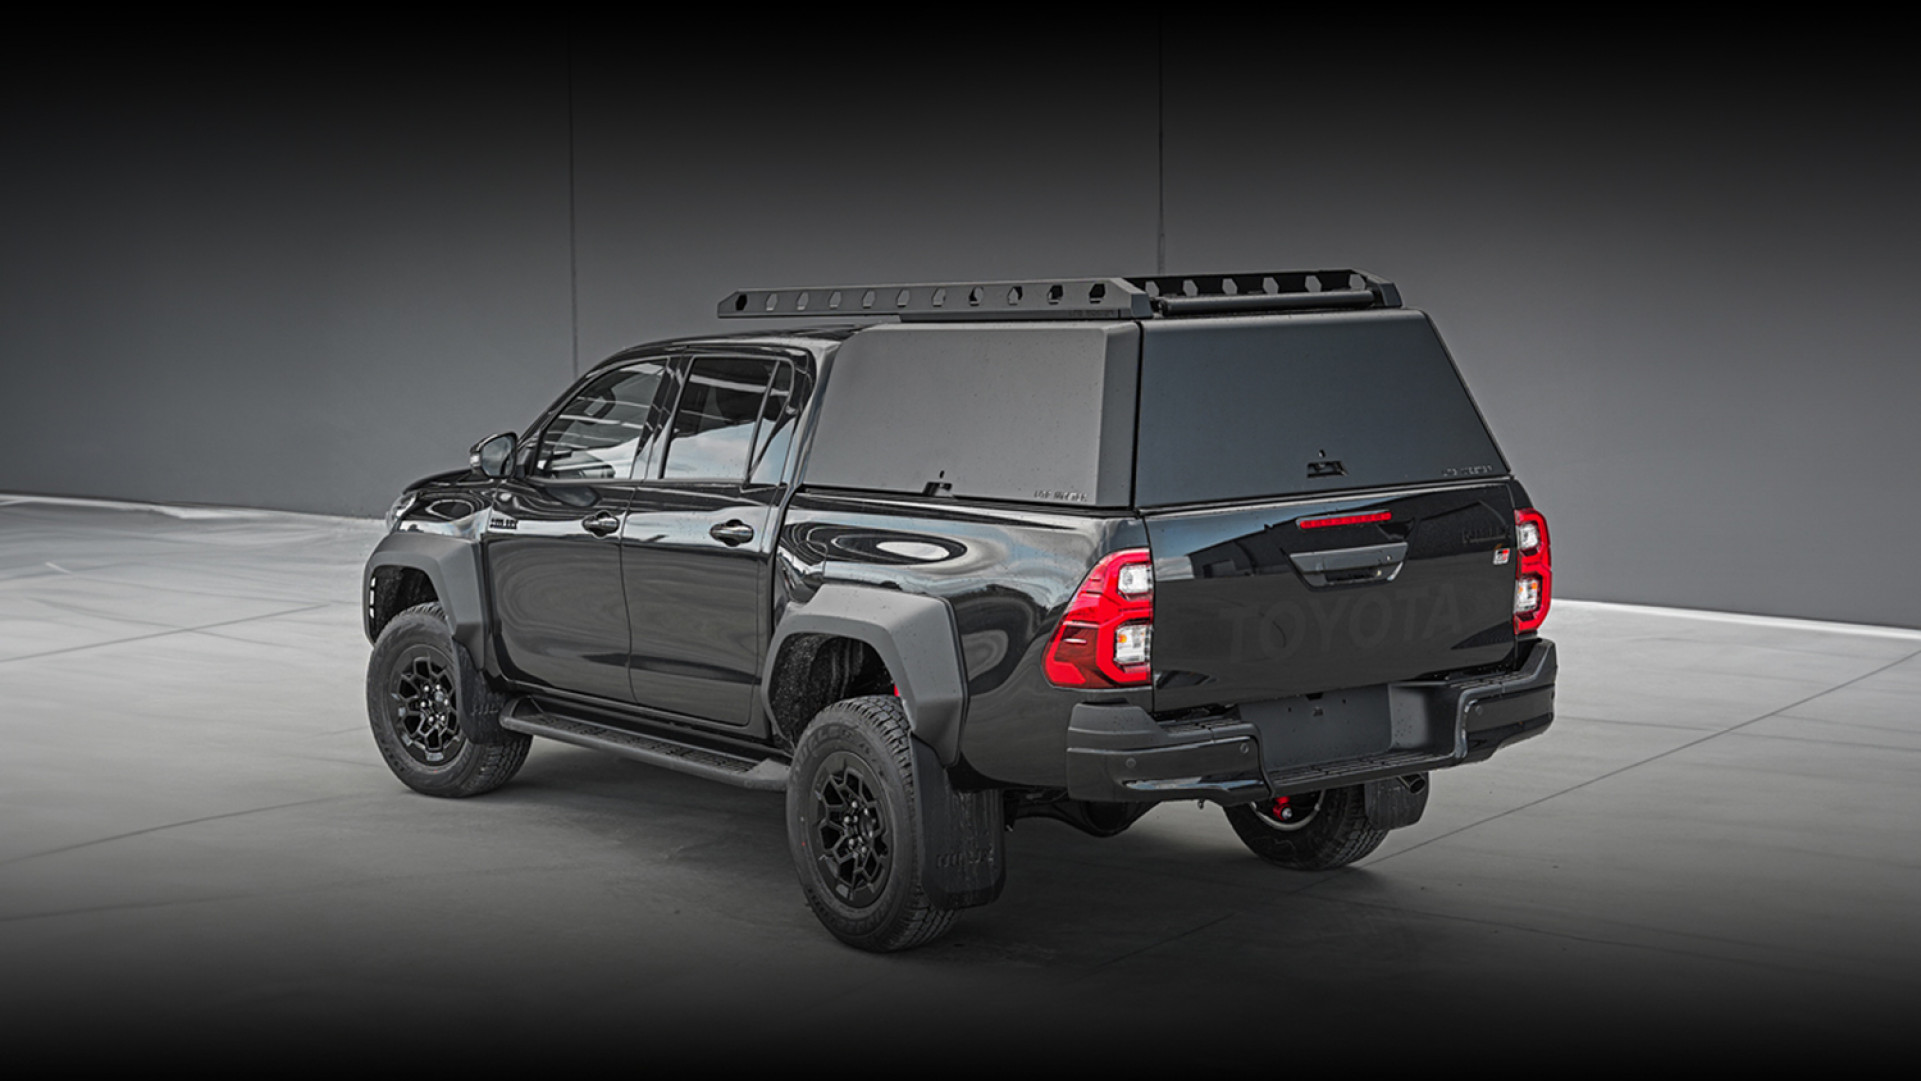 TOYOTA HILUX CANOPY